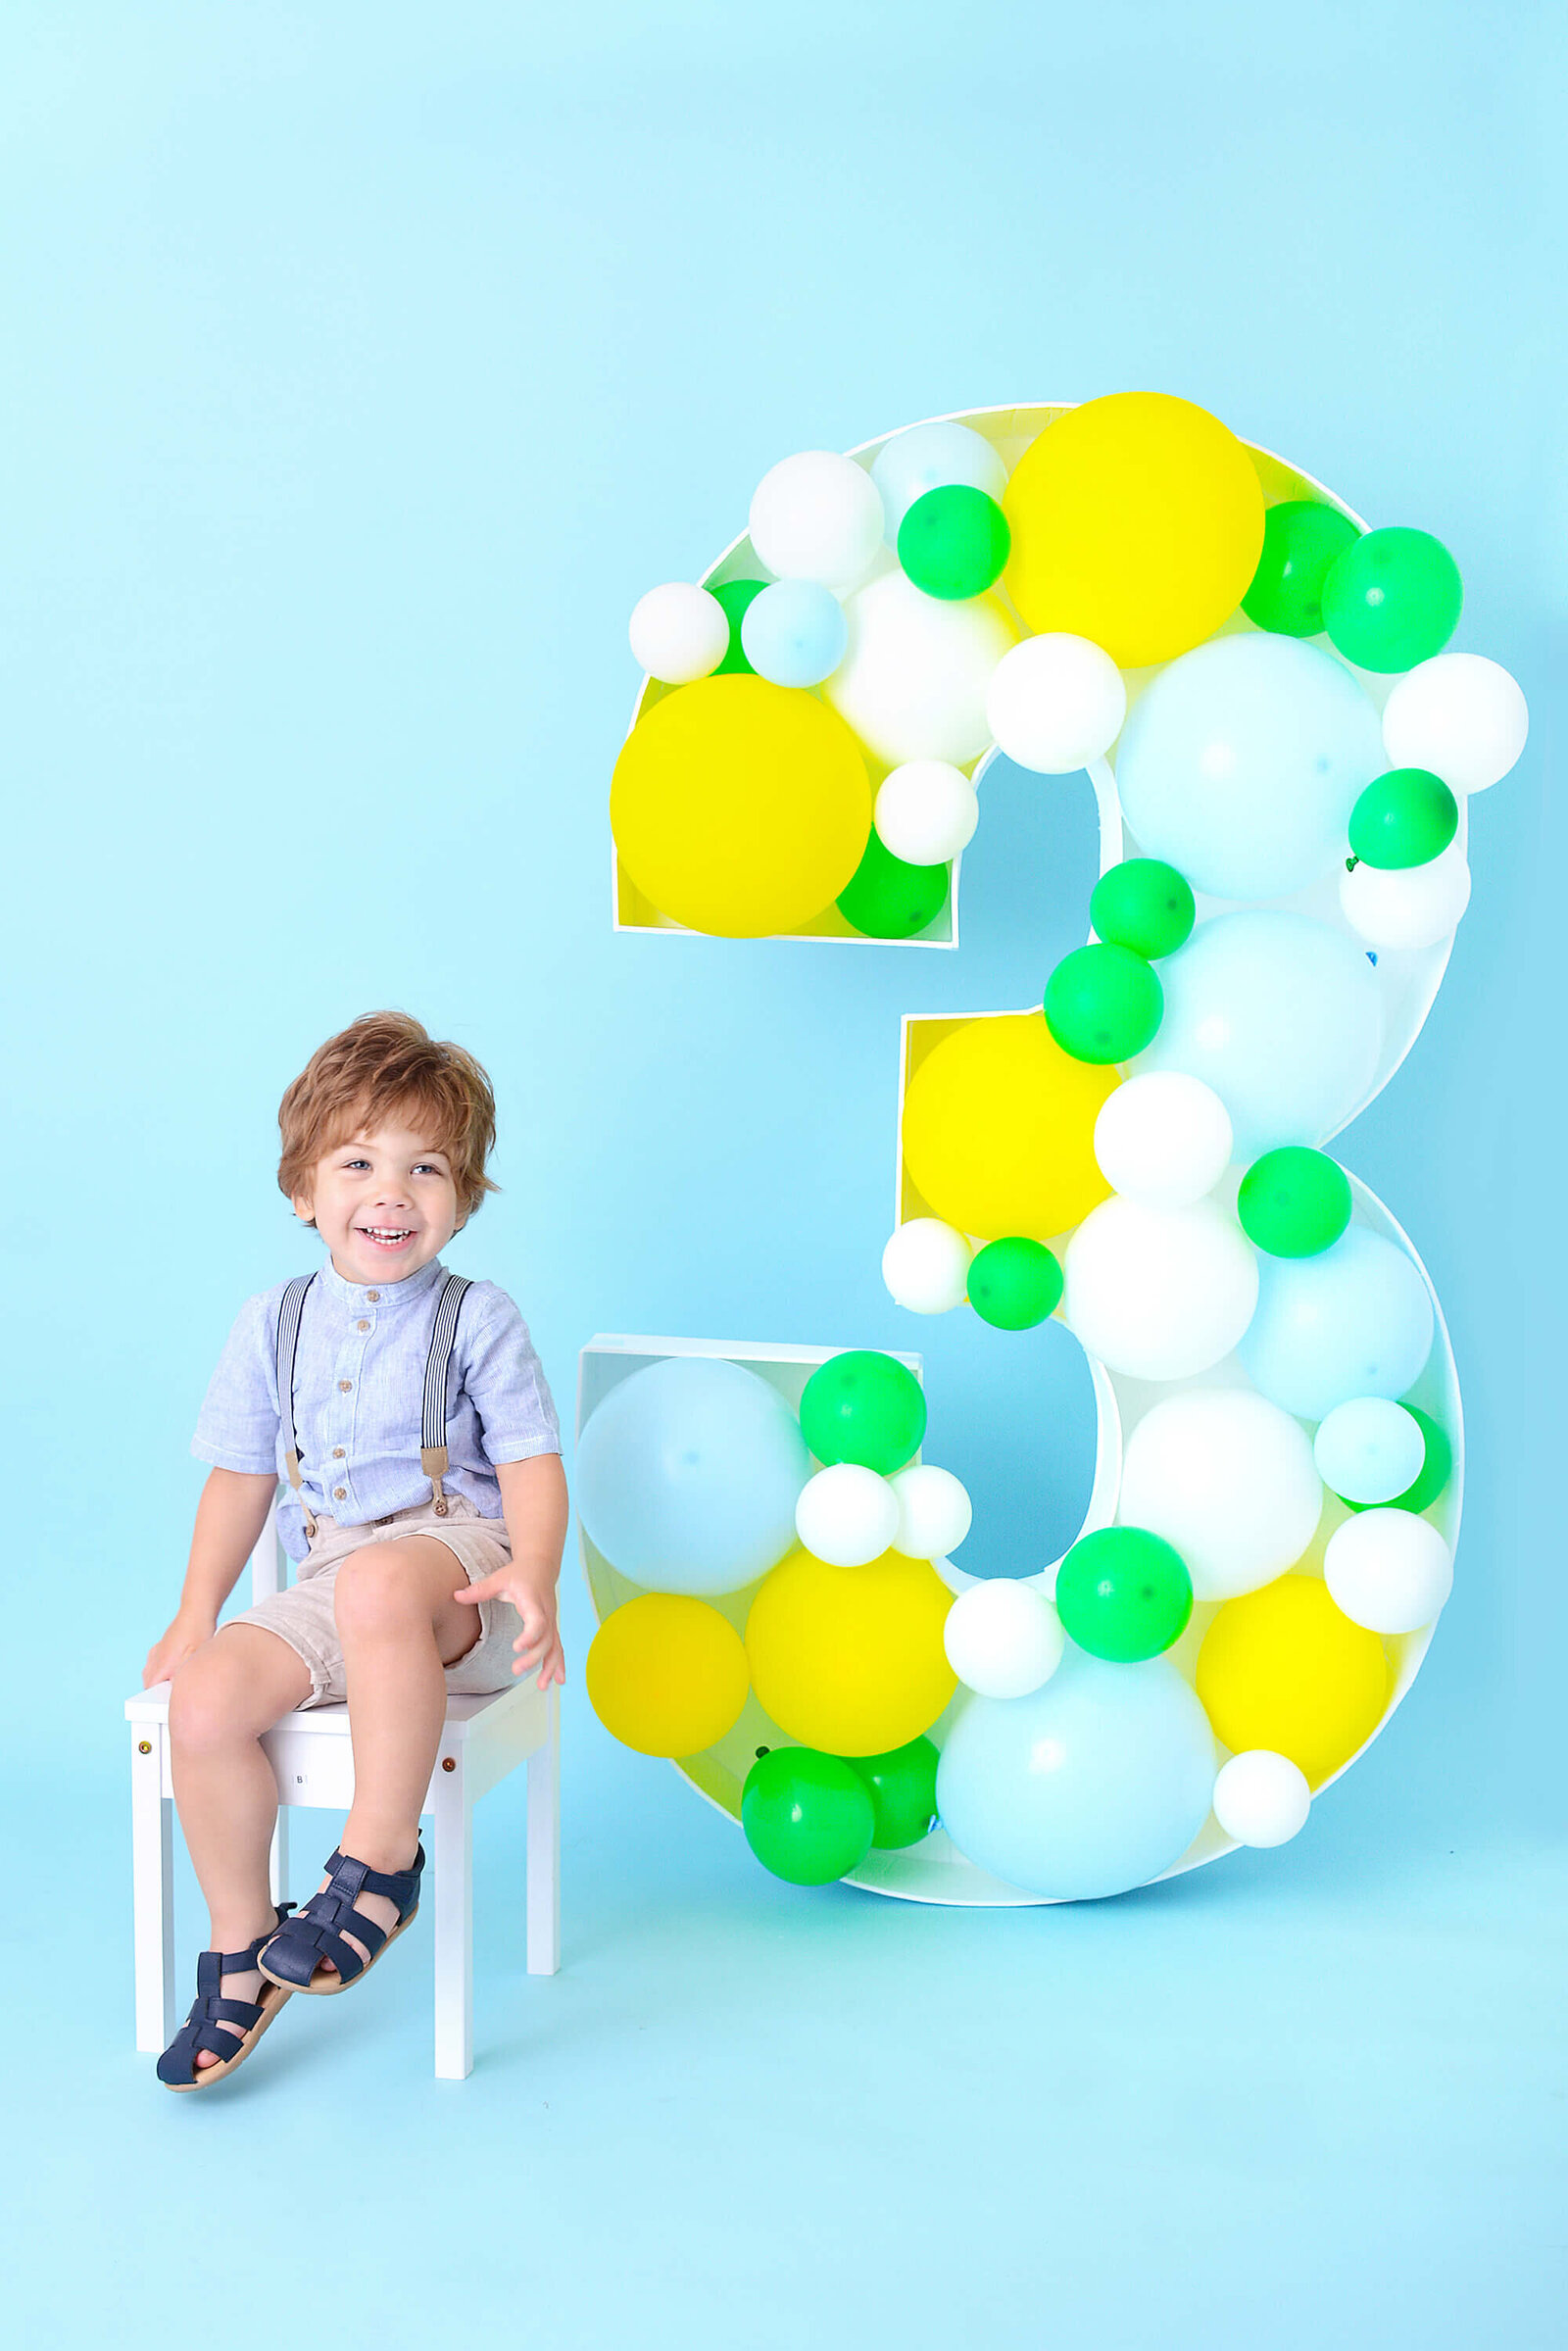 boy smiles with a large 3 made from balloons at his colorful birthday shoot